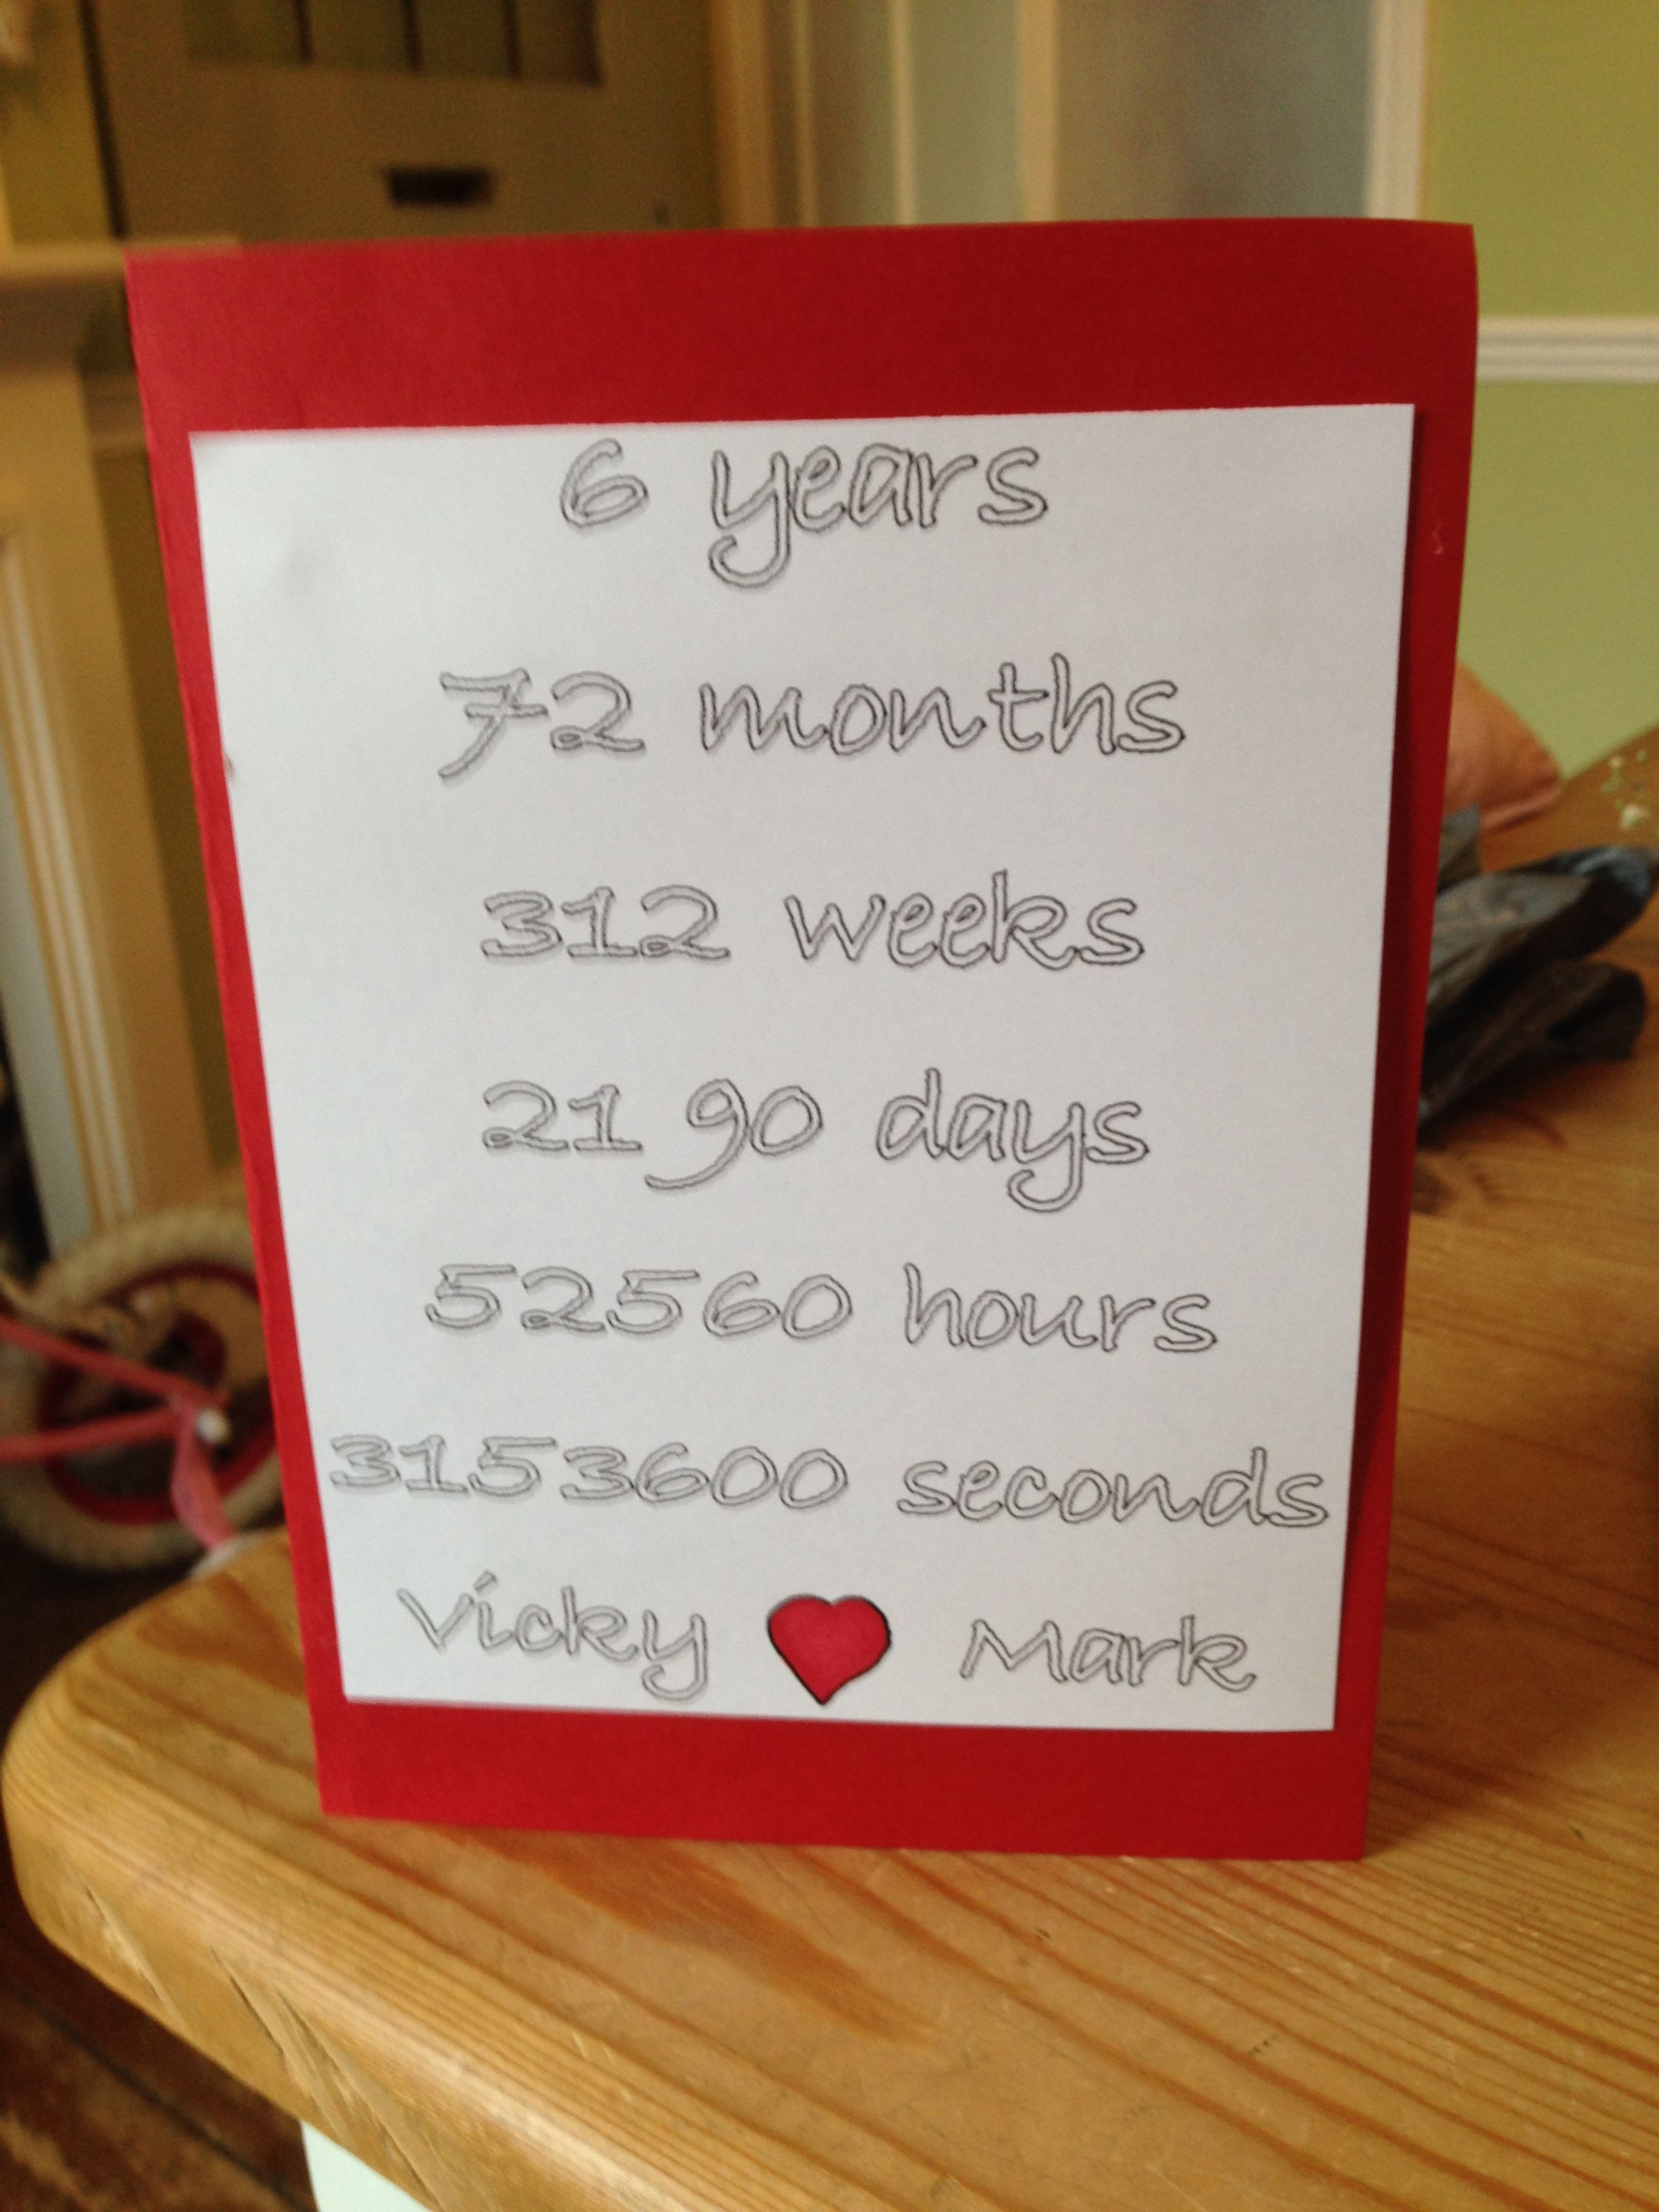 6 Year Anniversary Quotes
 6 year anniversary card love it